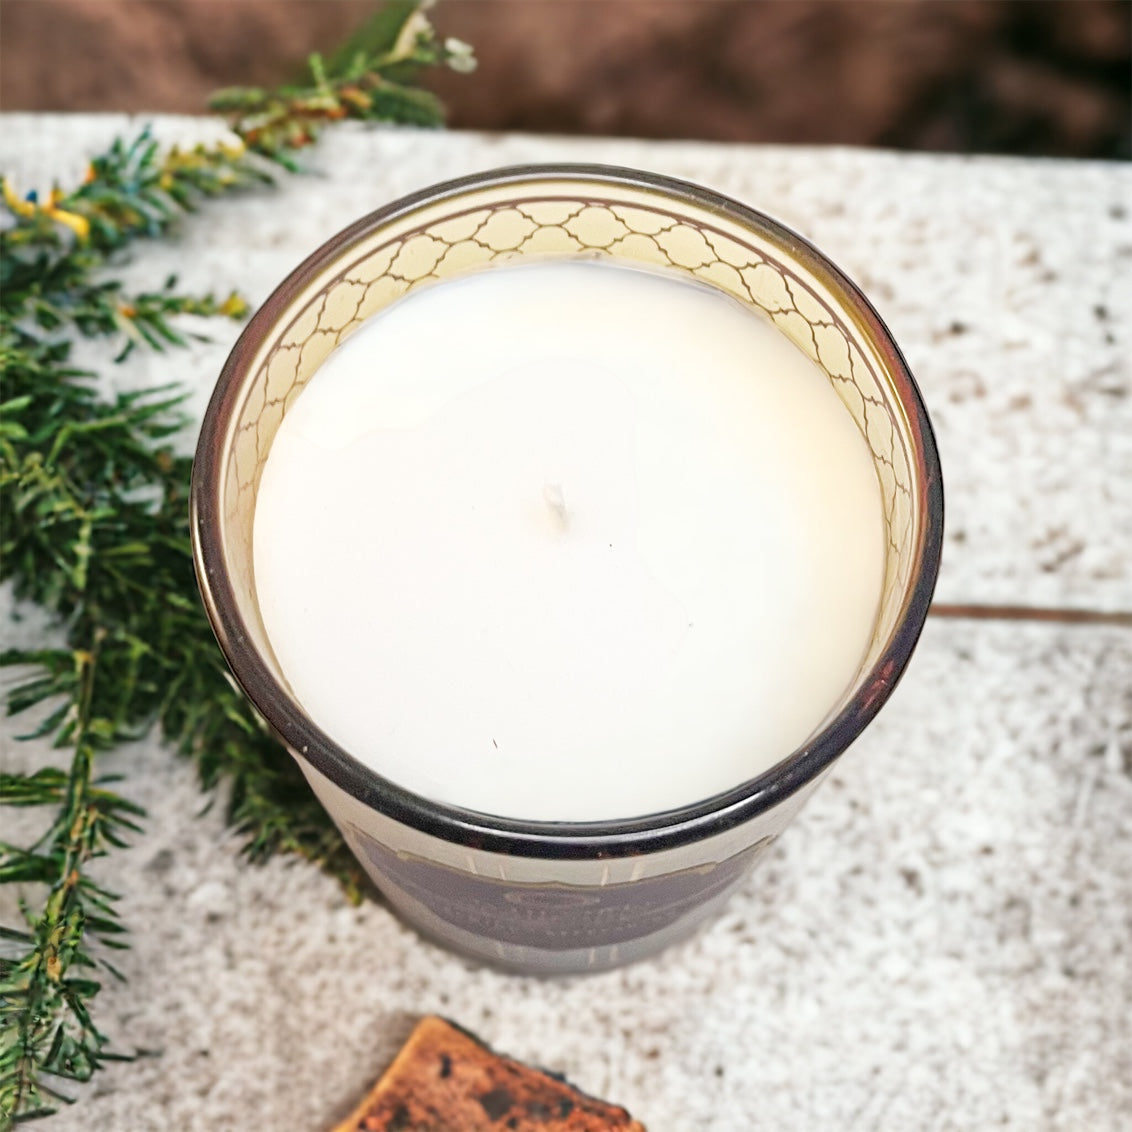 Ayurvedic Scented Candle